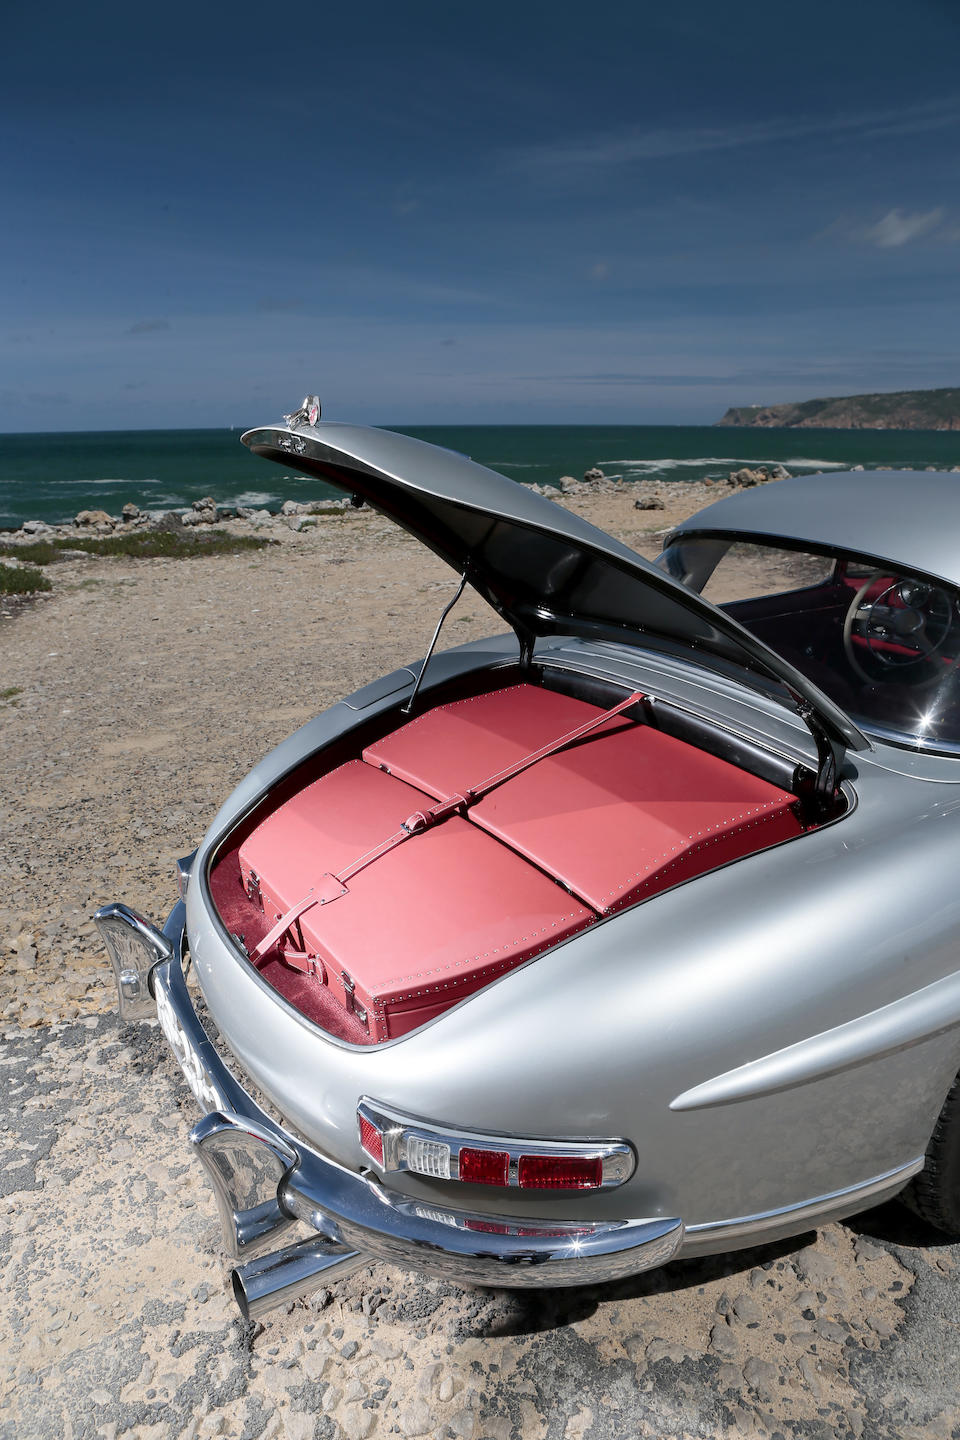 35,000kms from new,1958 Mercedes-Benz 300SL Roadster  Chassis no. 198.042-8500212 Engine no. 198.042-8500219